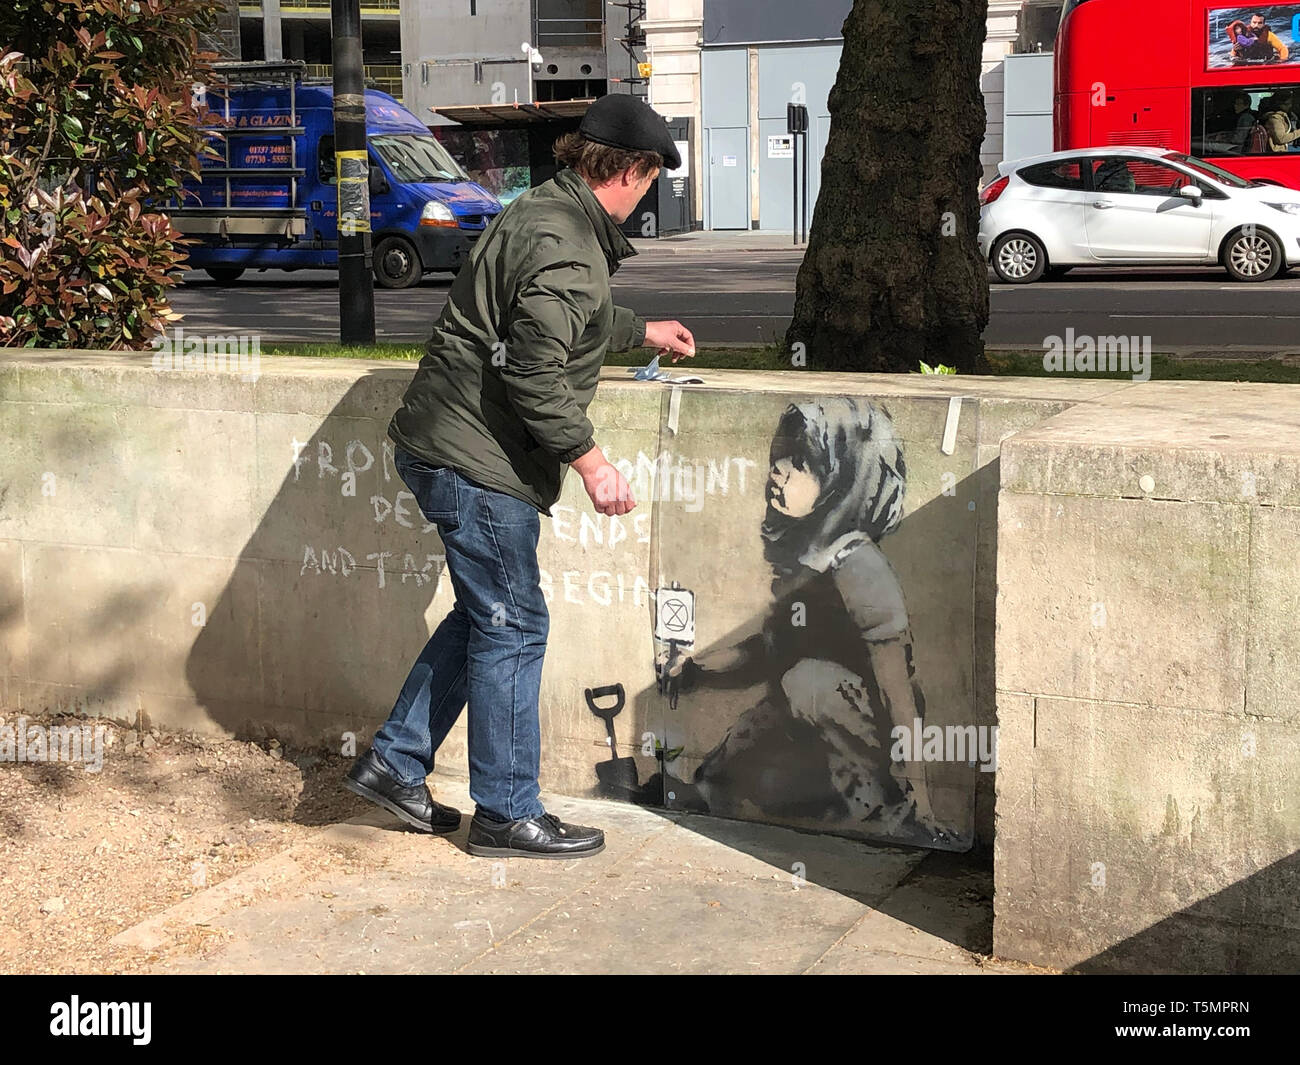 Calvin Benson, 48, puts a protective plastic sheeting over an artwork which appears to be by street artist Banksy. The environmental artwork has appeared near the Extinction Rebellion camp in Marble Arch, London. Stock Photo